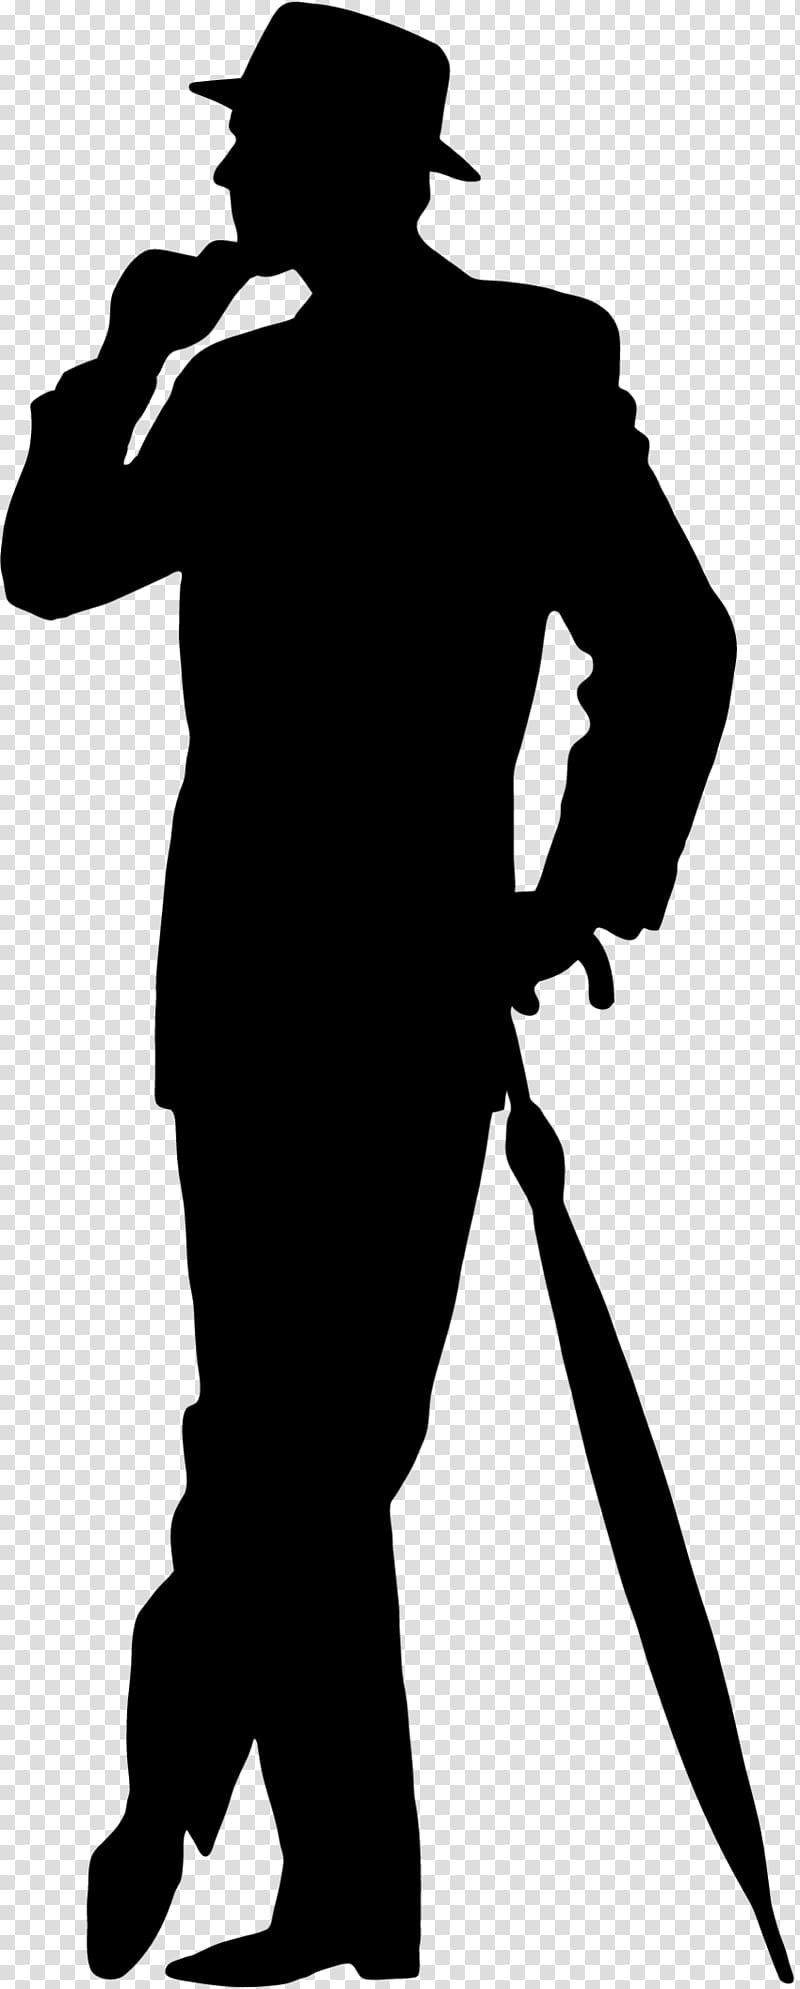 Silhouette Male, man silhouette transparent background PNG clipart